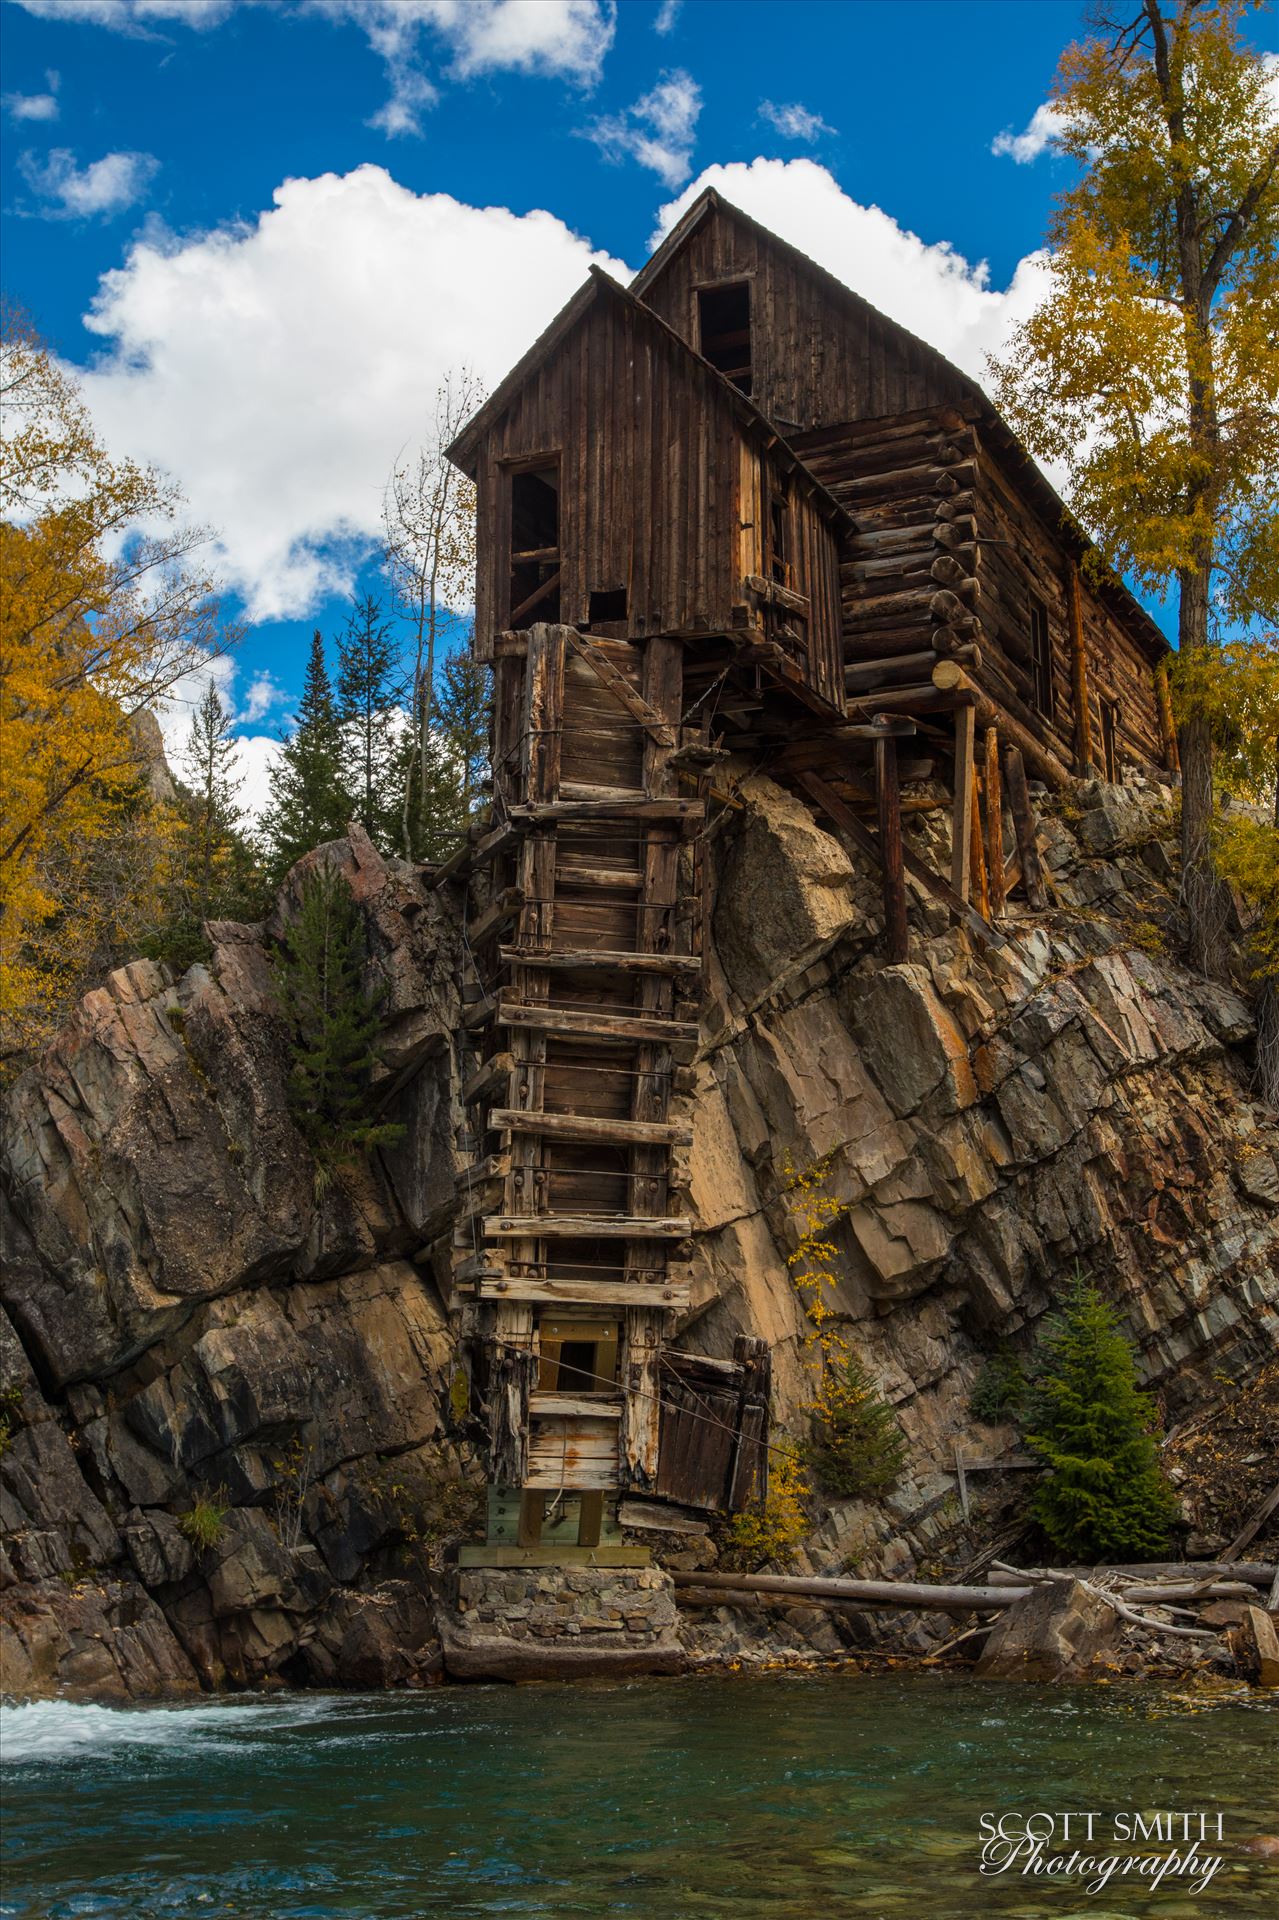 Crystal Mill, Colorado 13 - The Crystal Mill, or the Old Mill is an 1892 wooden powerhouse located on an outcrop above the Crystal River in Crystal, Colorado by Scott Smith Photos